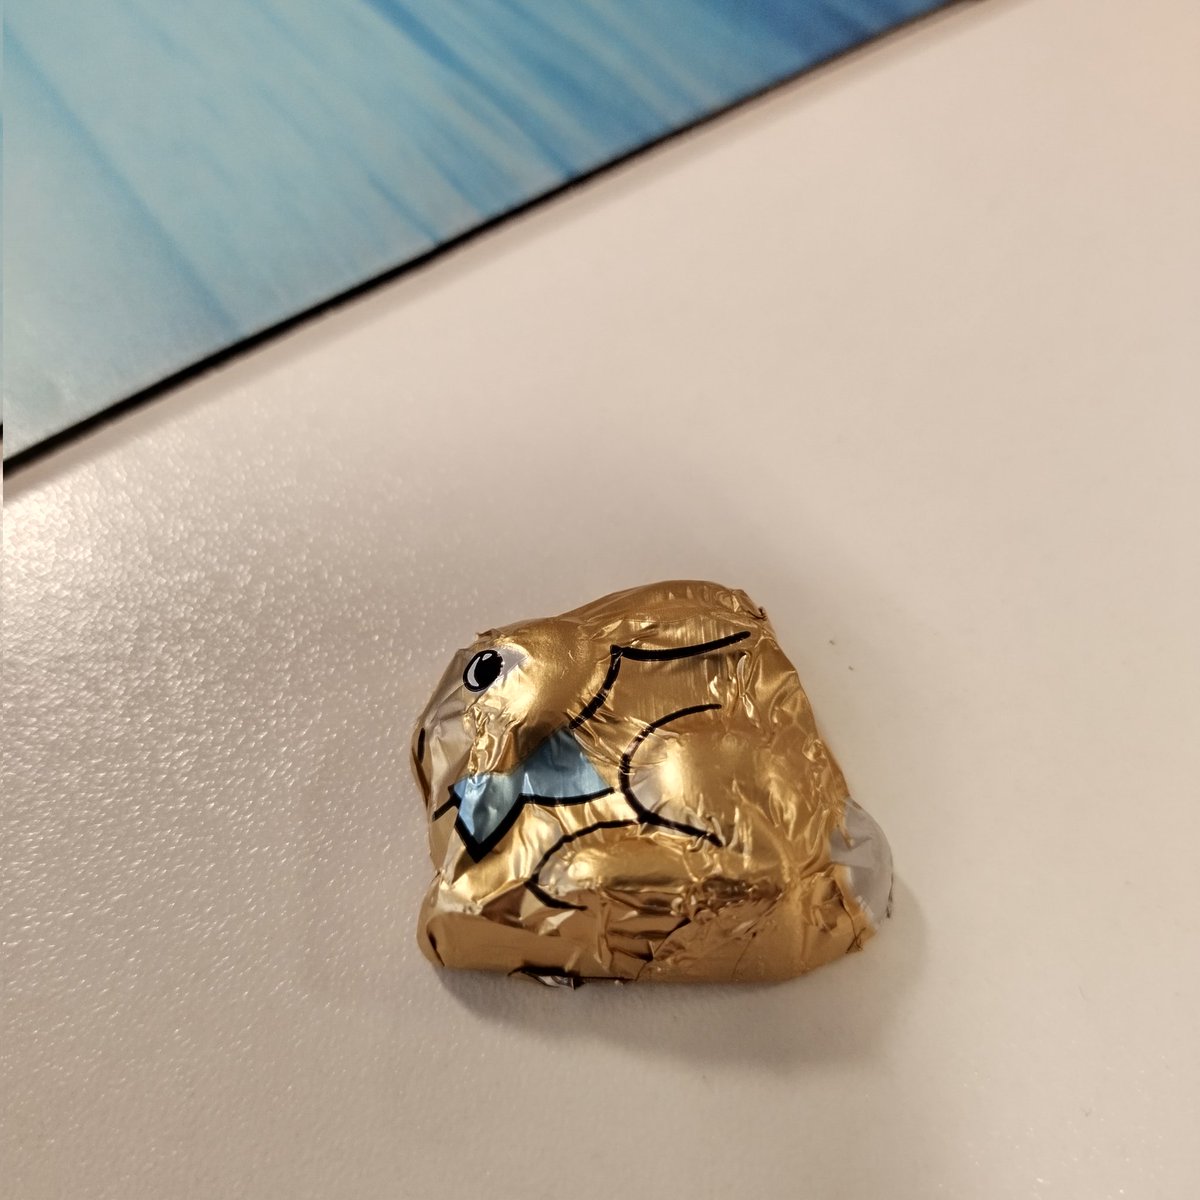 When your desk buddy, @JudithLong__, whispers 'Do you need an emergency chocolate bunny' and you realise that actually yes, you really do need a chocolate bunny...